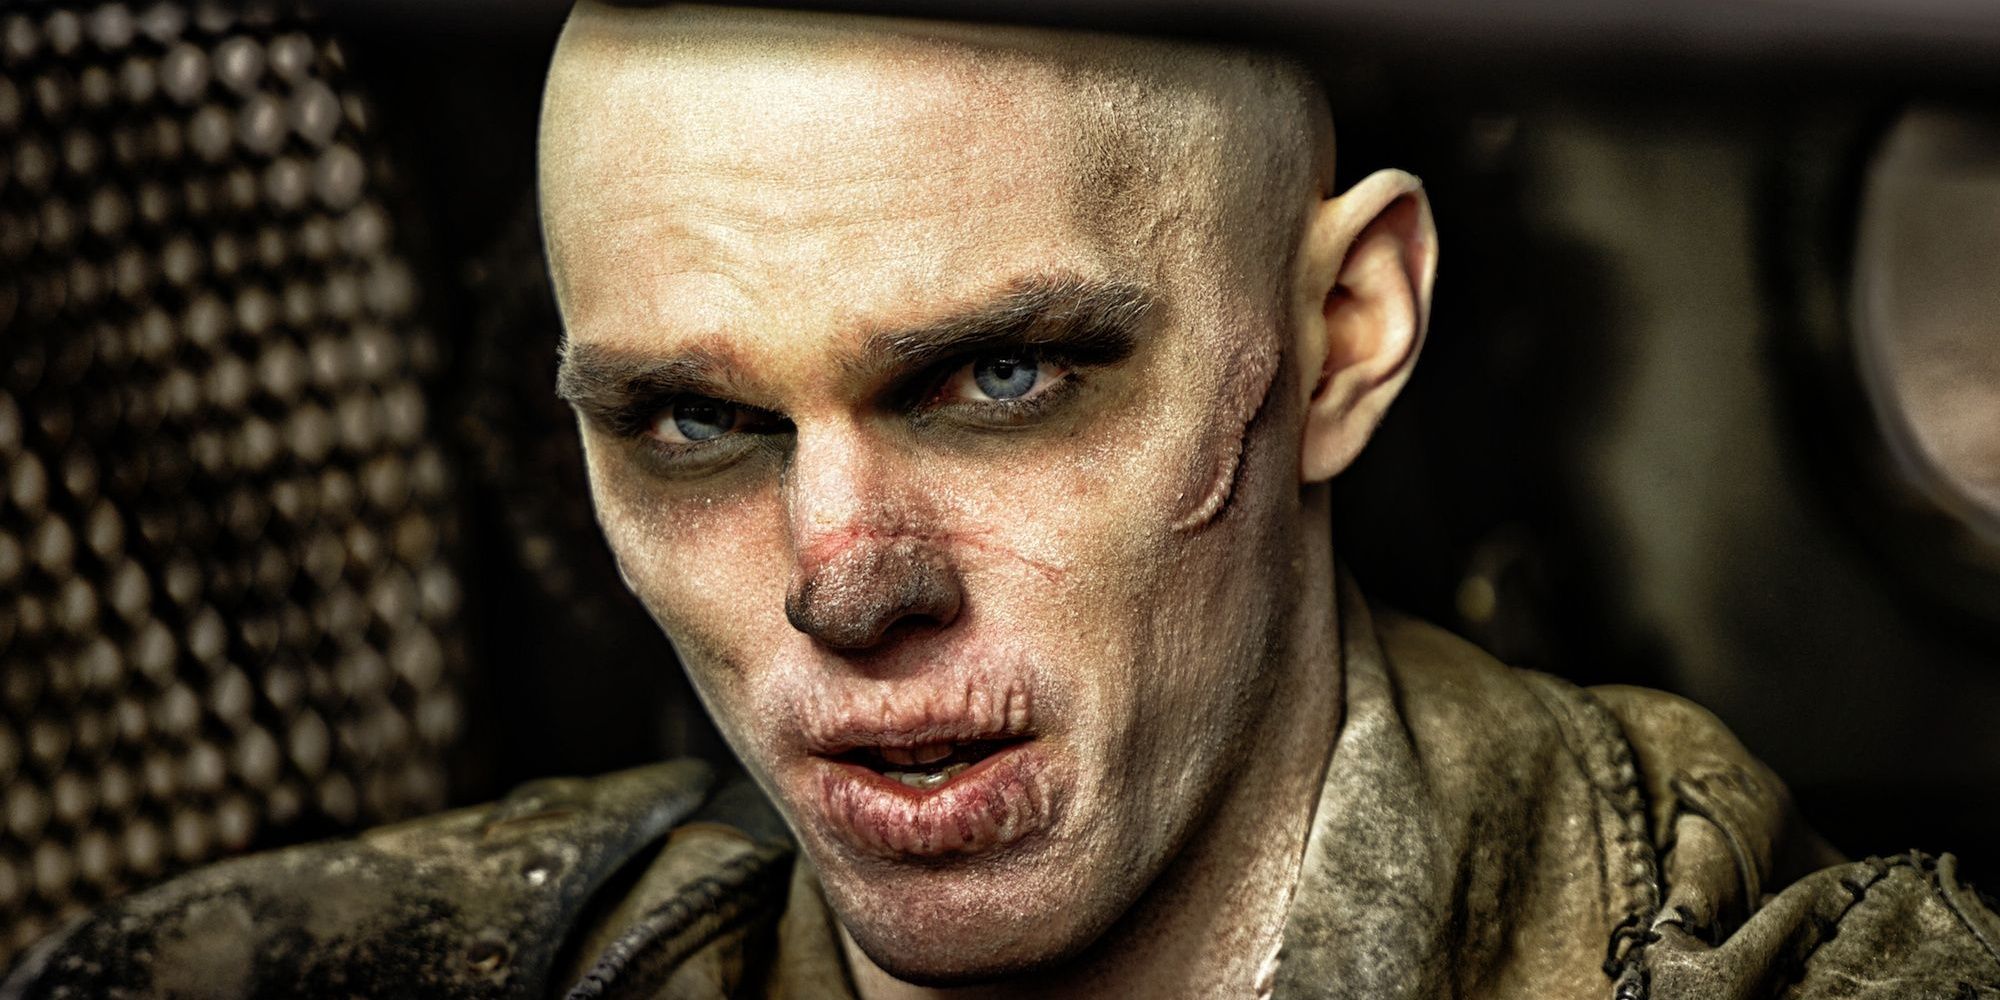 Nux in the War Rig in Mad Mad: Fury Road, looking pale and covered in sores.